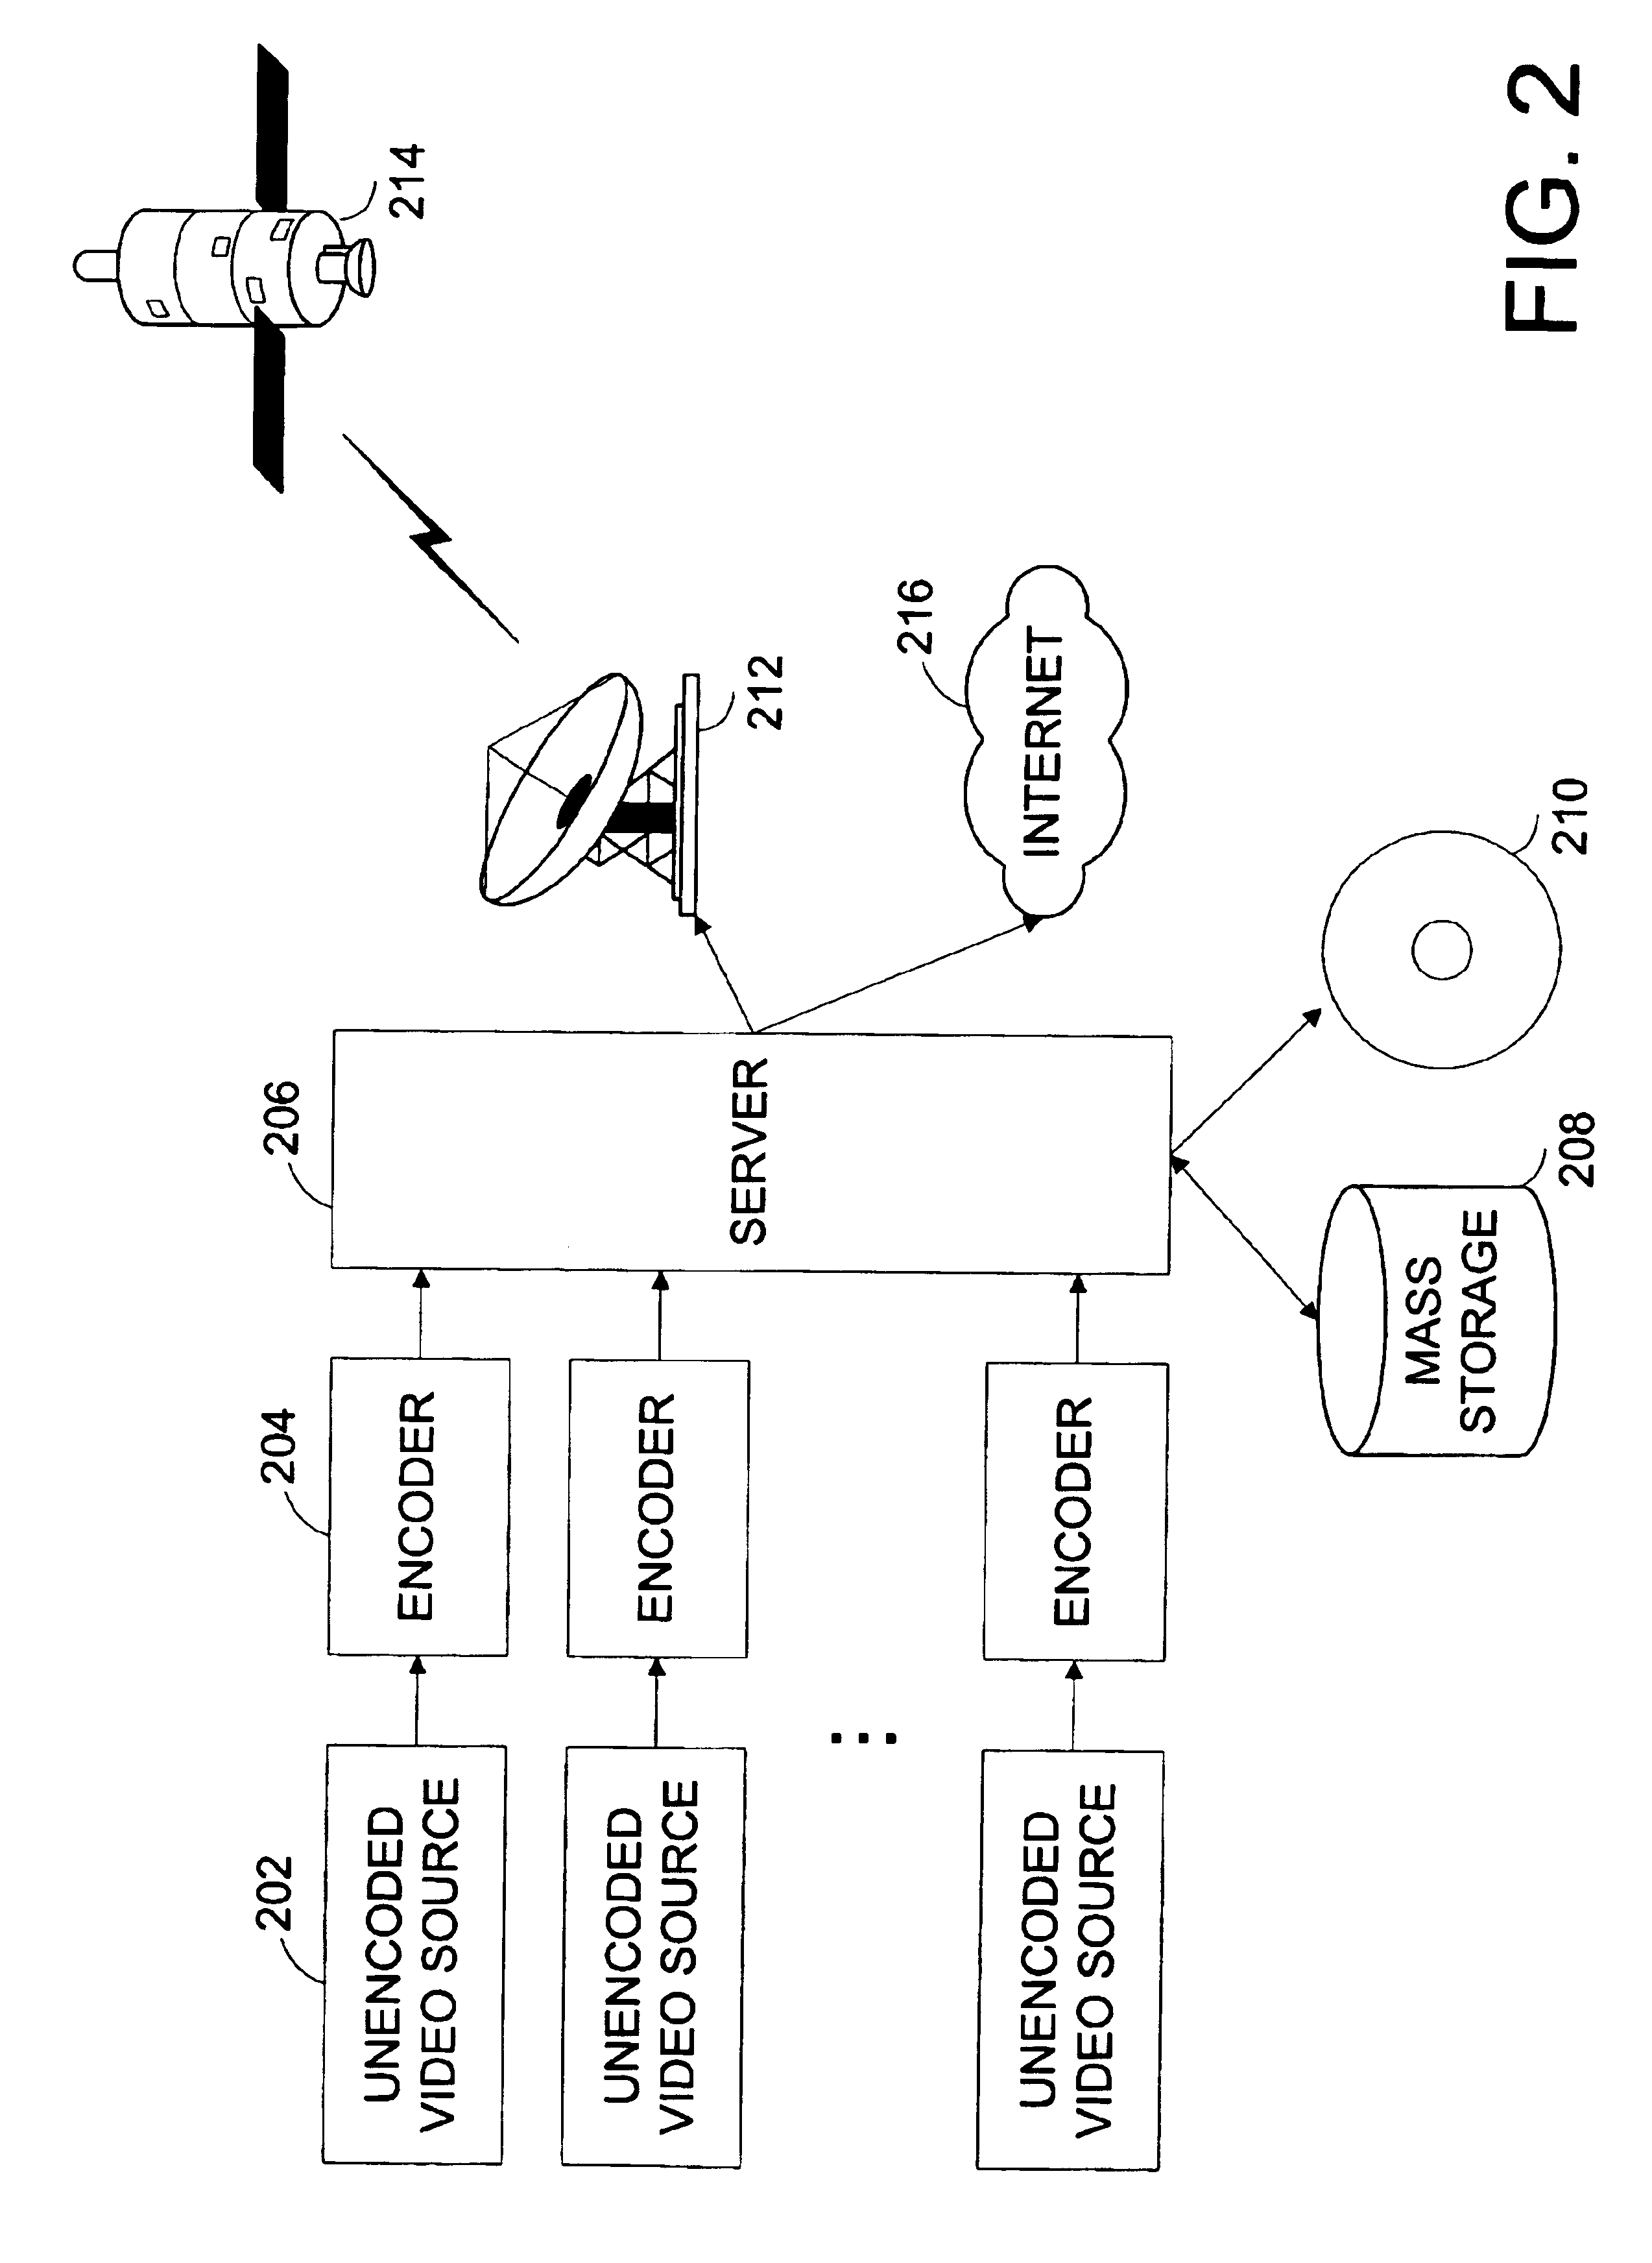 Systems and methods for selecting a macroblock mode in a video encoder